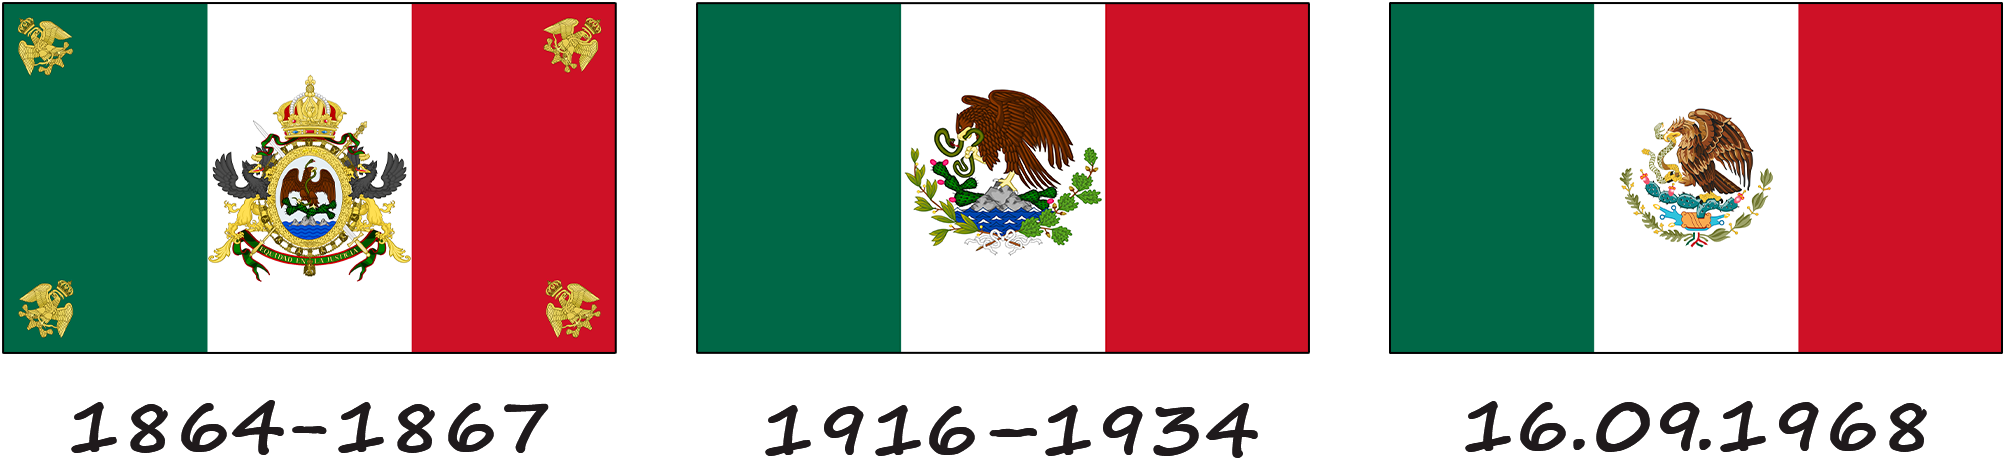 History of the flag of Mexico